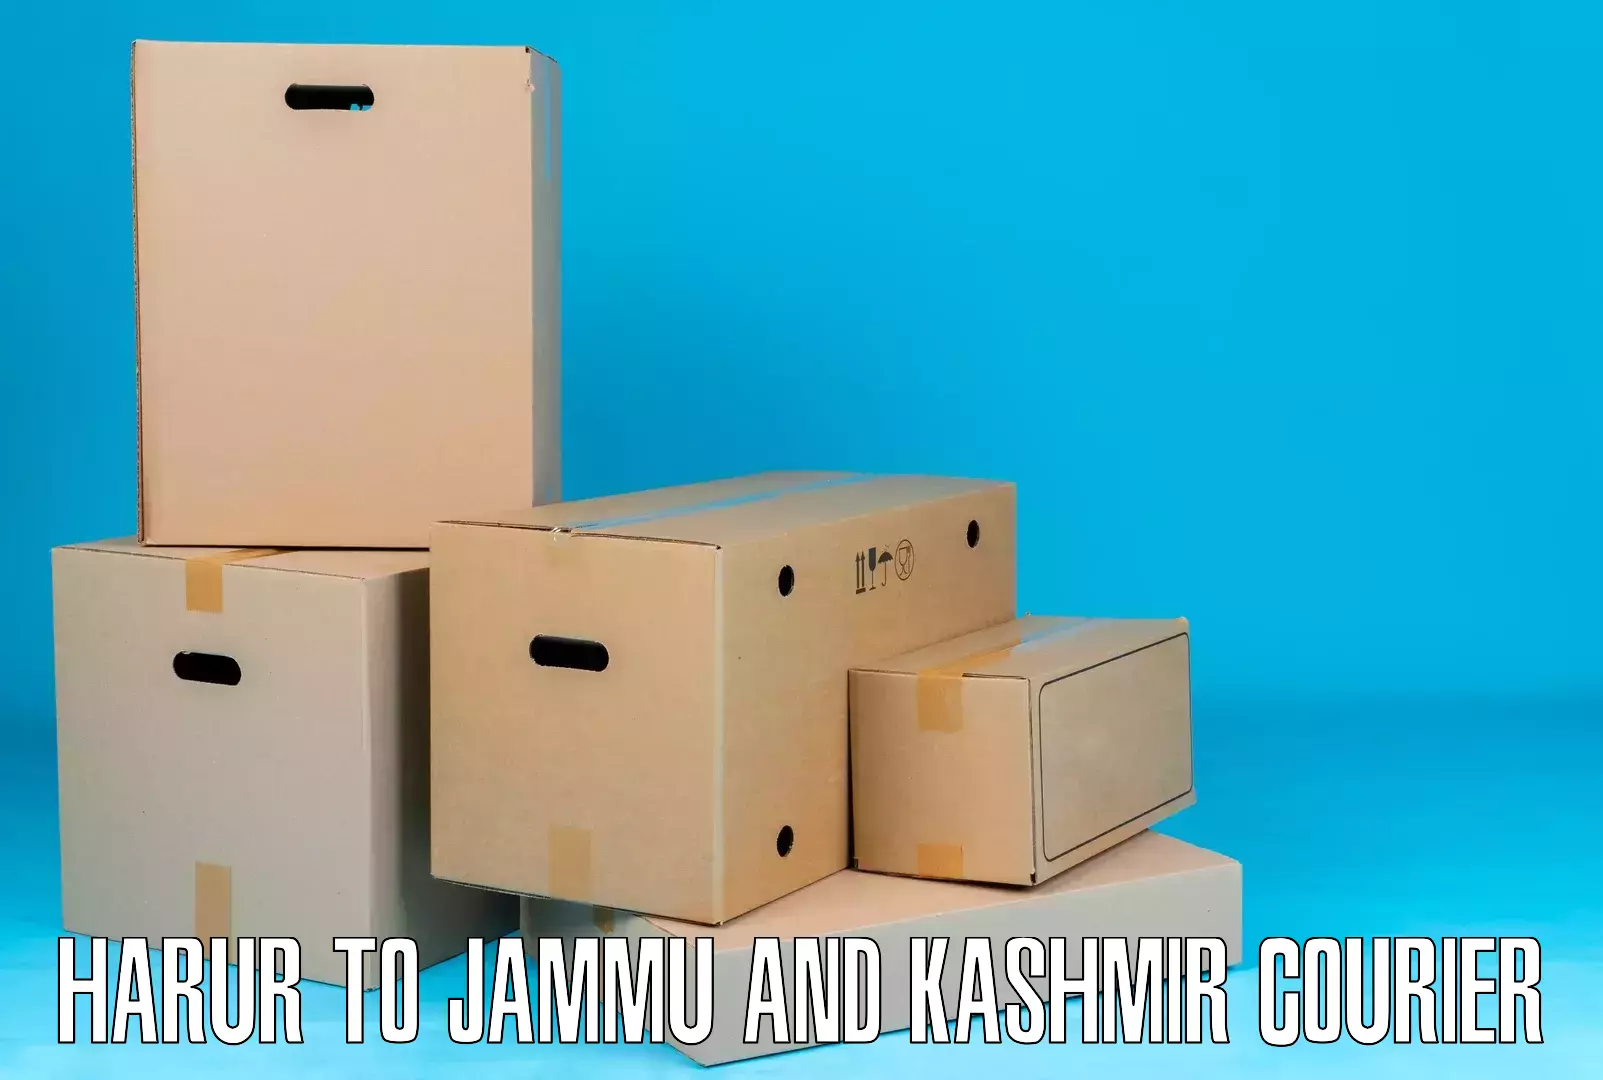 Easy access courier services Harur to Baramulla